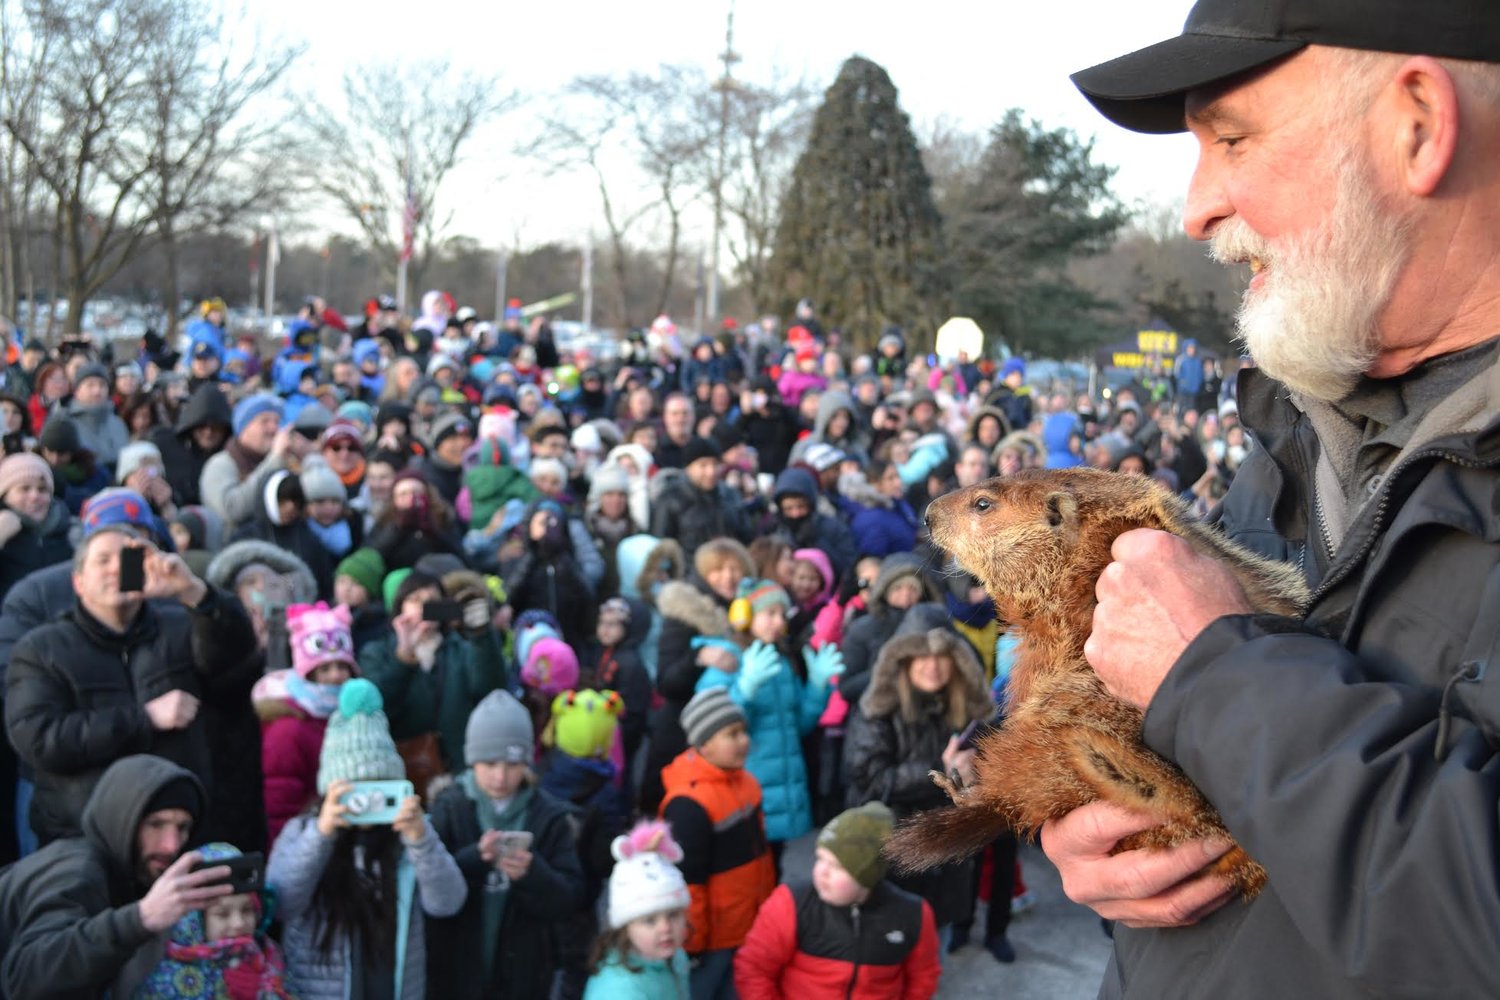 Holtsville Hal’s handler, Gregg Drossel, shows him to the crowd during a previous Groundhog Day celebration.